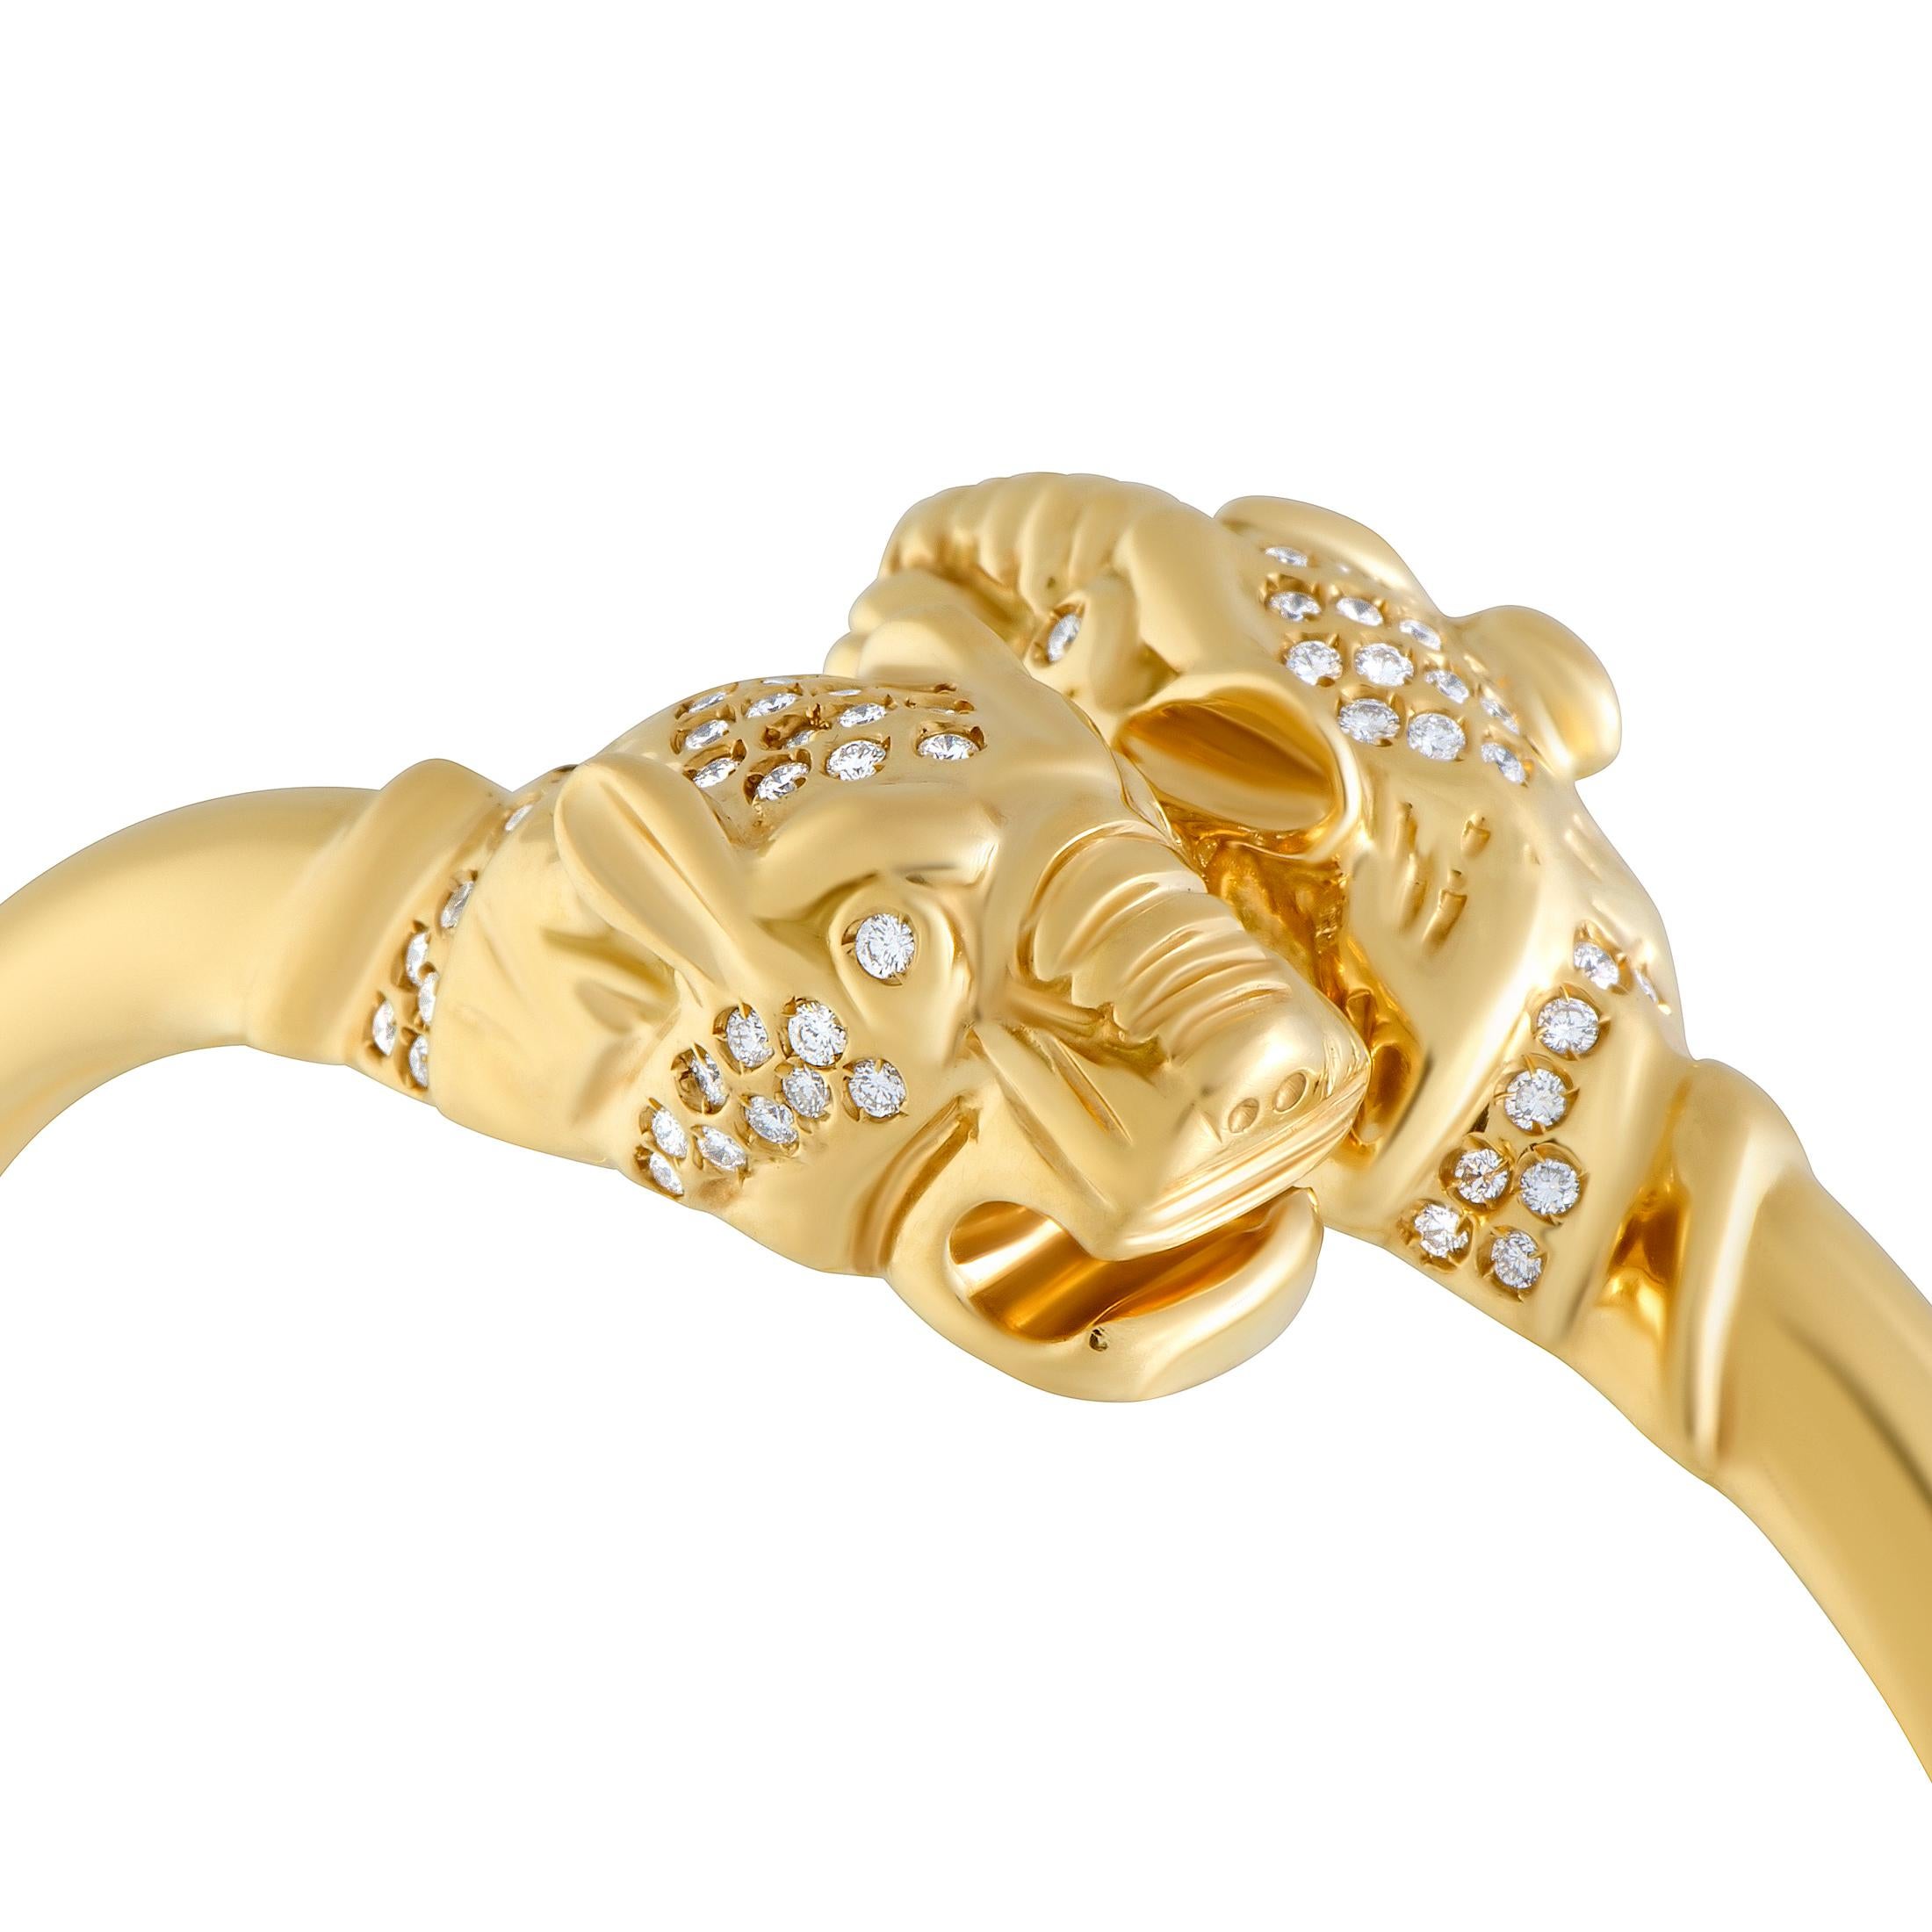 If you wish to accentuate your ensembles in a fashionable yet distinctly luxurious manner then this incredible statement piece from Gucci is an excellent choice. The bracelet is wonderfully crafted from radiant 18K yellow gold and it is embellished